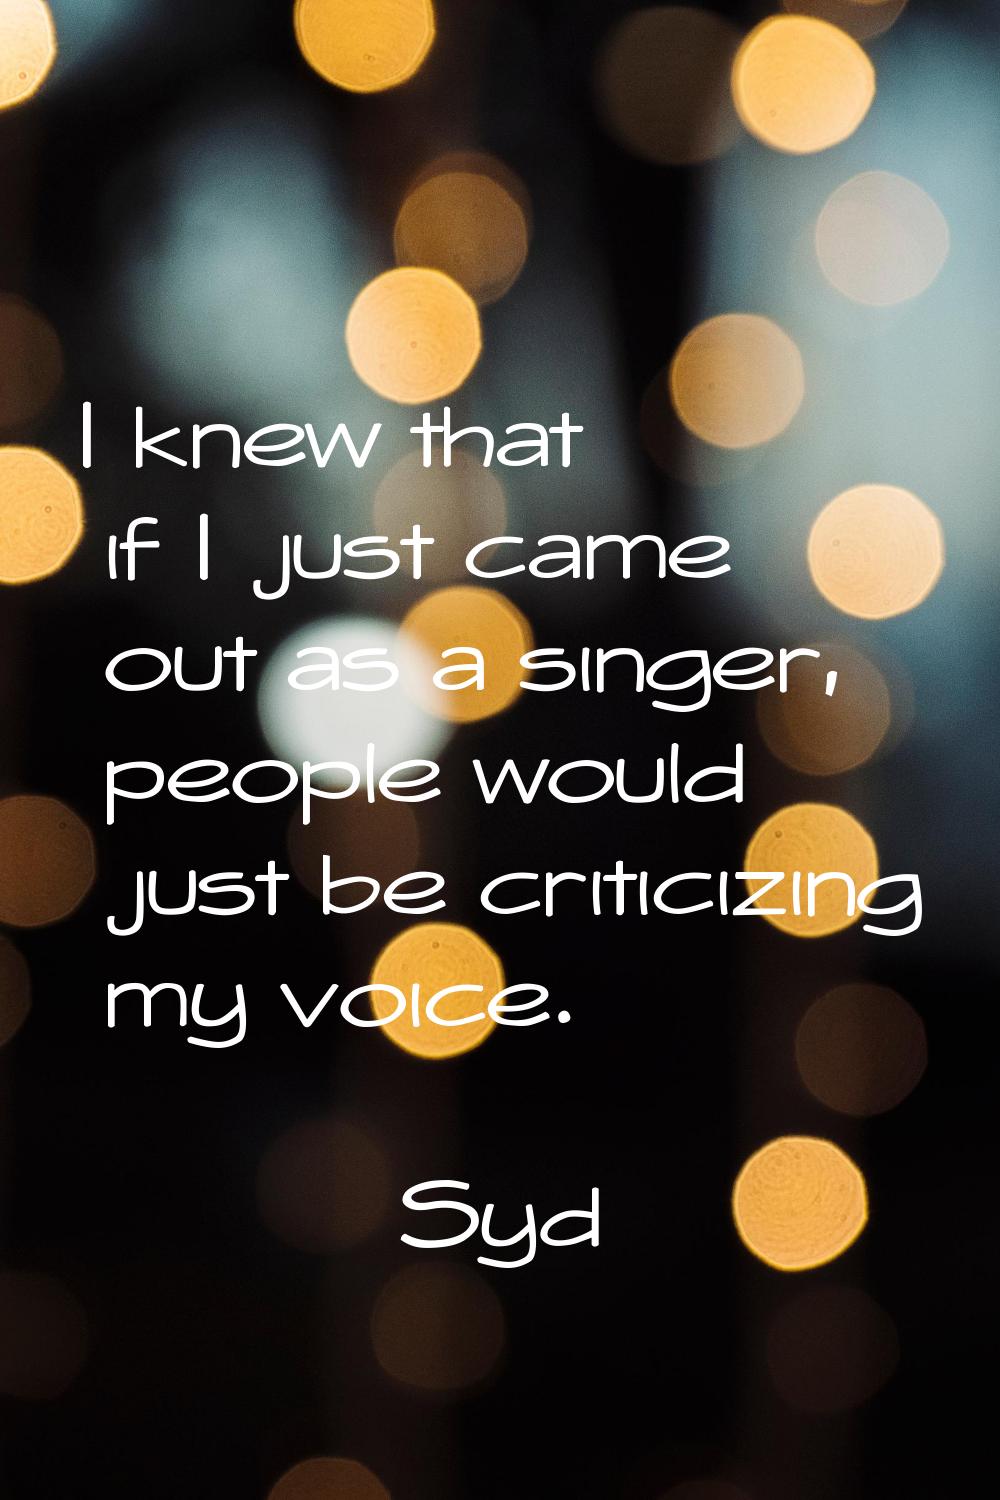 I knew that if I just came out as a singer, people would just be criticizing my voice.